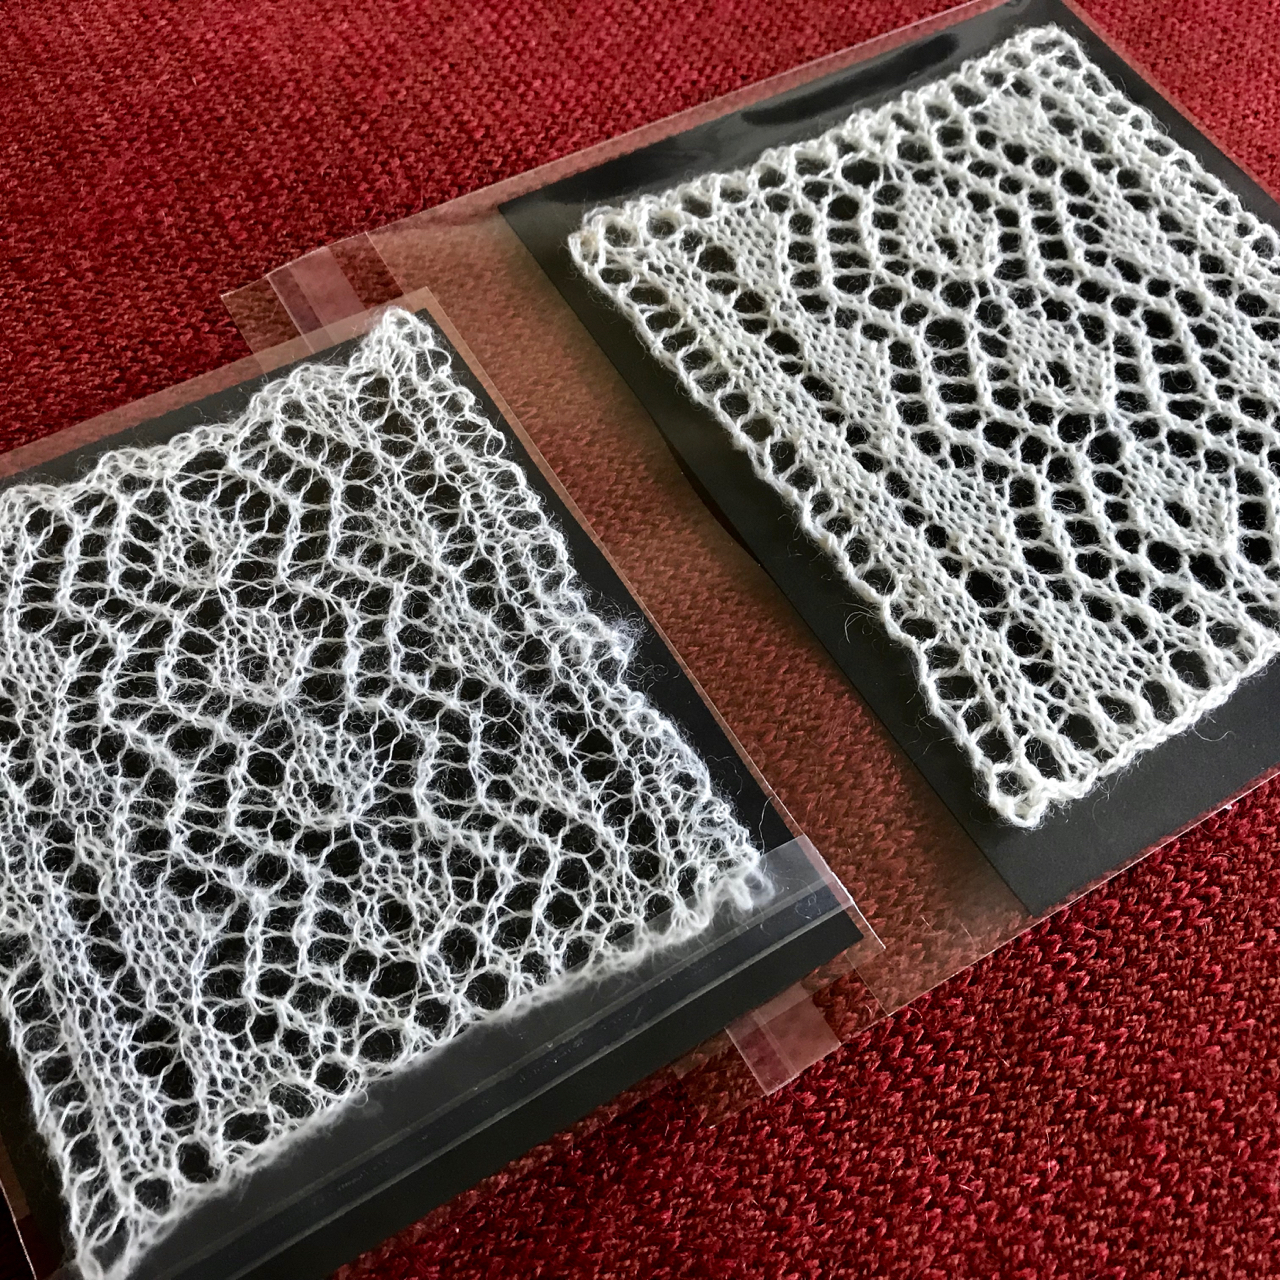 Historic Knitted Lace Project